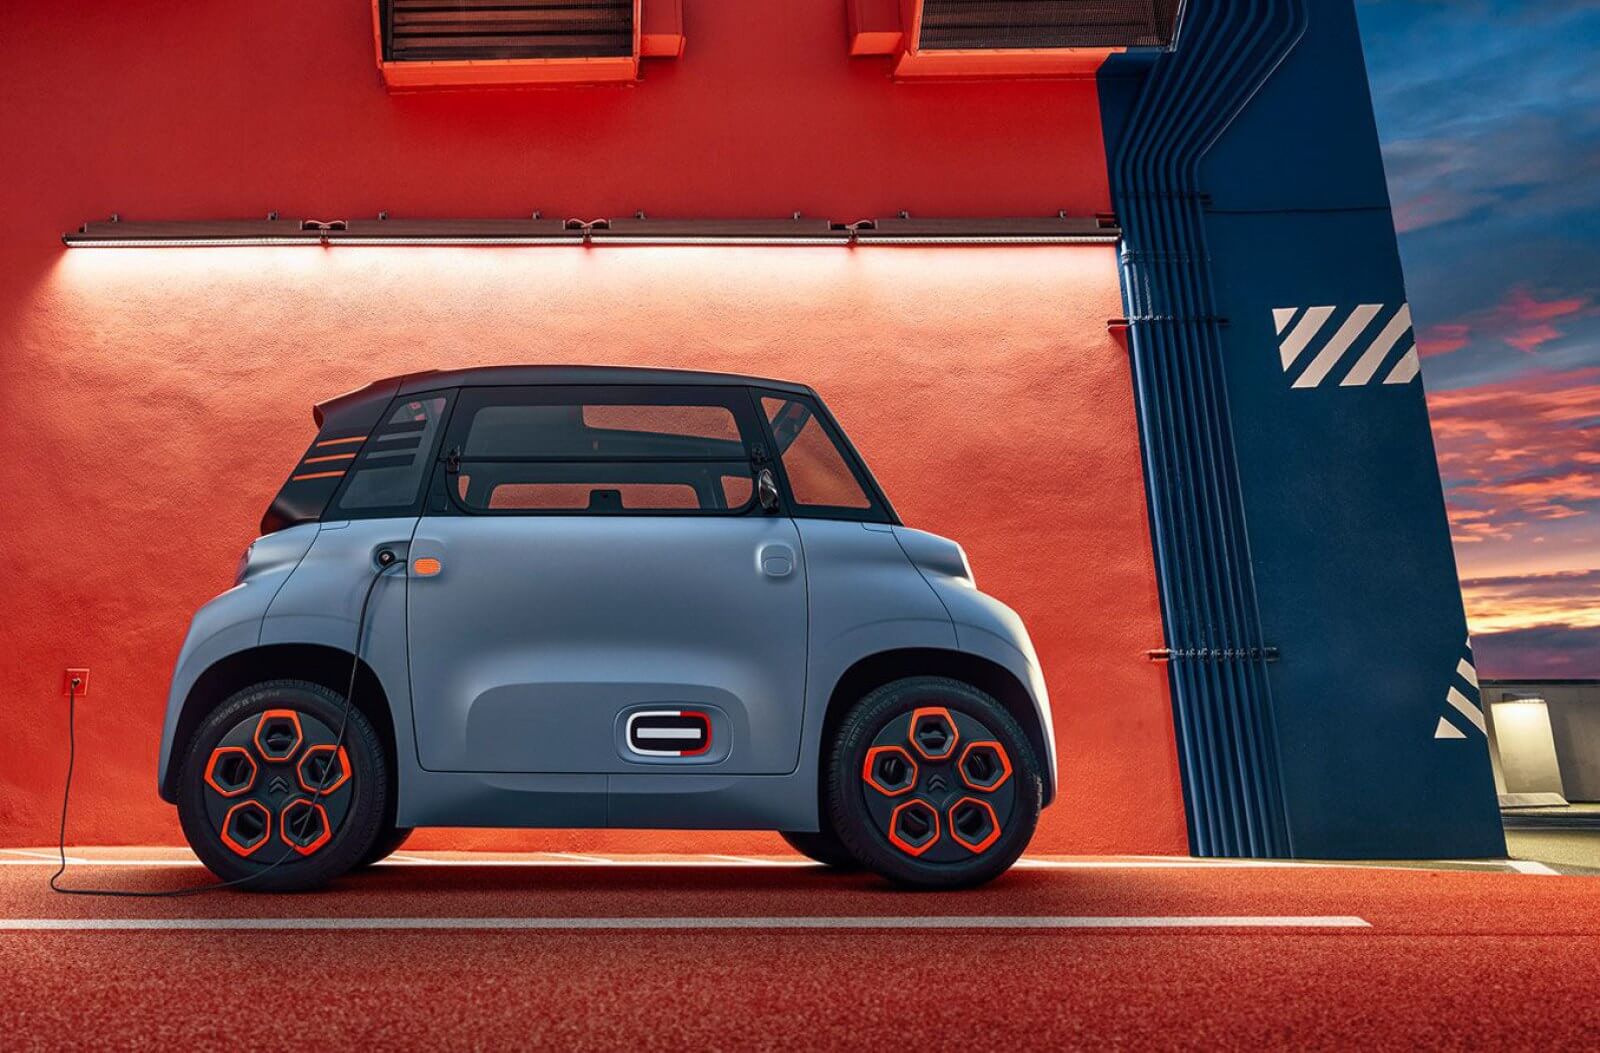 Citroën unveils 2-seat EV that costs $22 per month and doesn't require a license